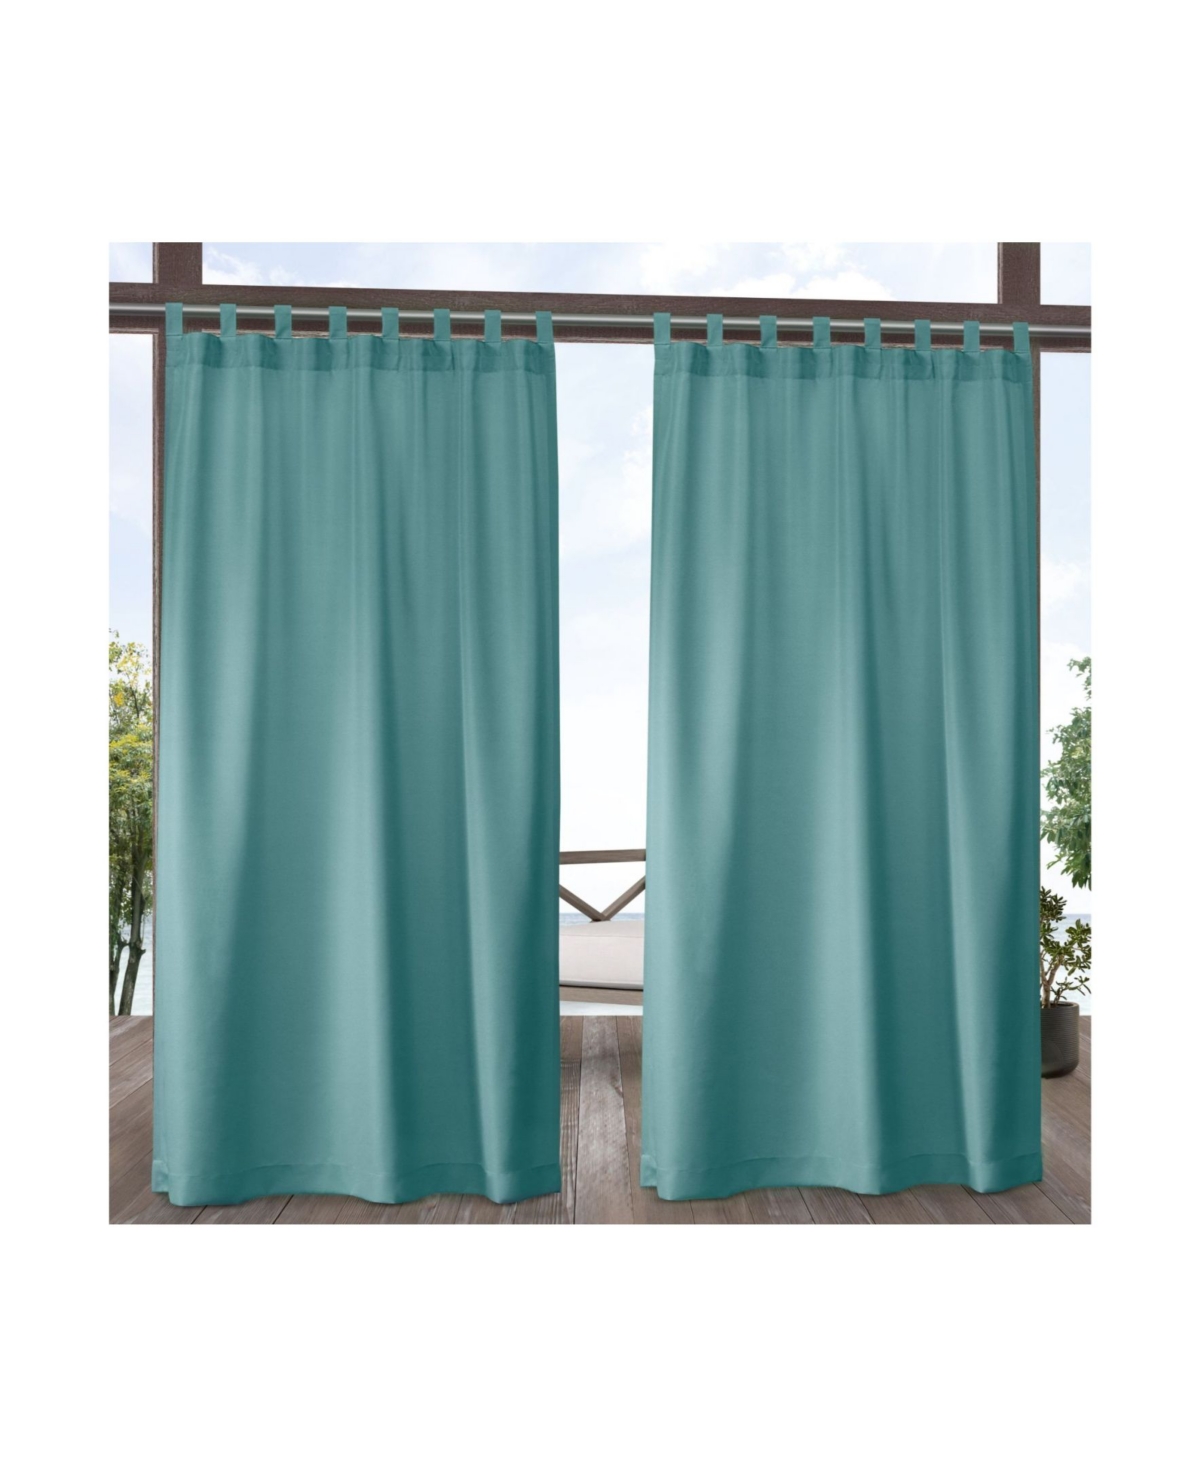 Curtains Indoor - Outdoor Solid Cabana Tab Top Curtain Panel Pair, 54" x 120" - Multi